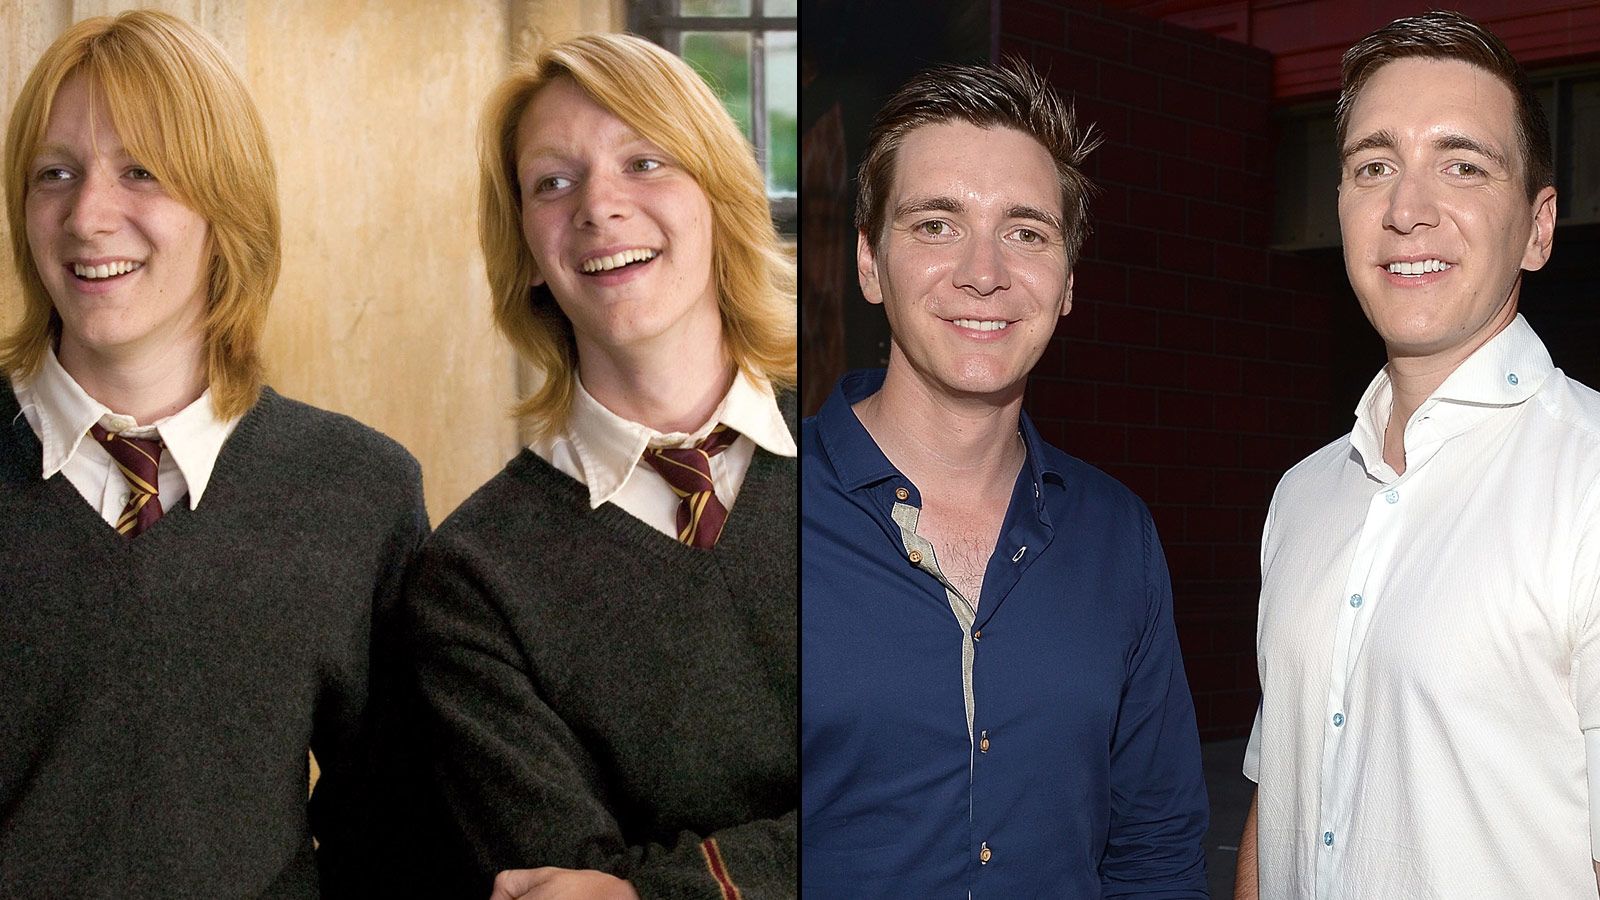 Harry Potter Kids: Then And Now